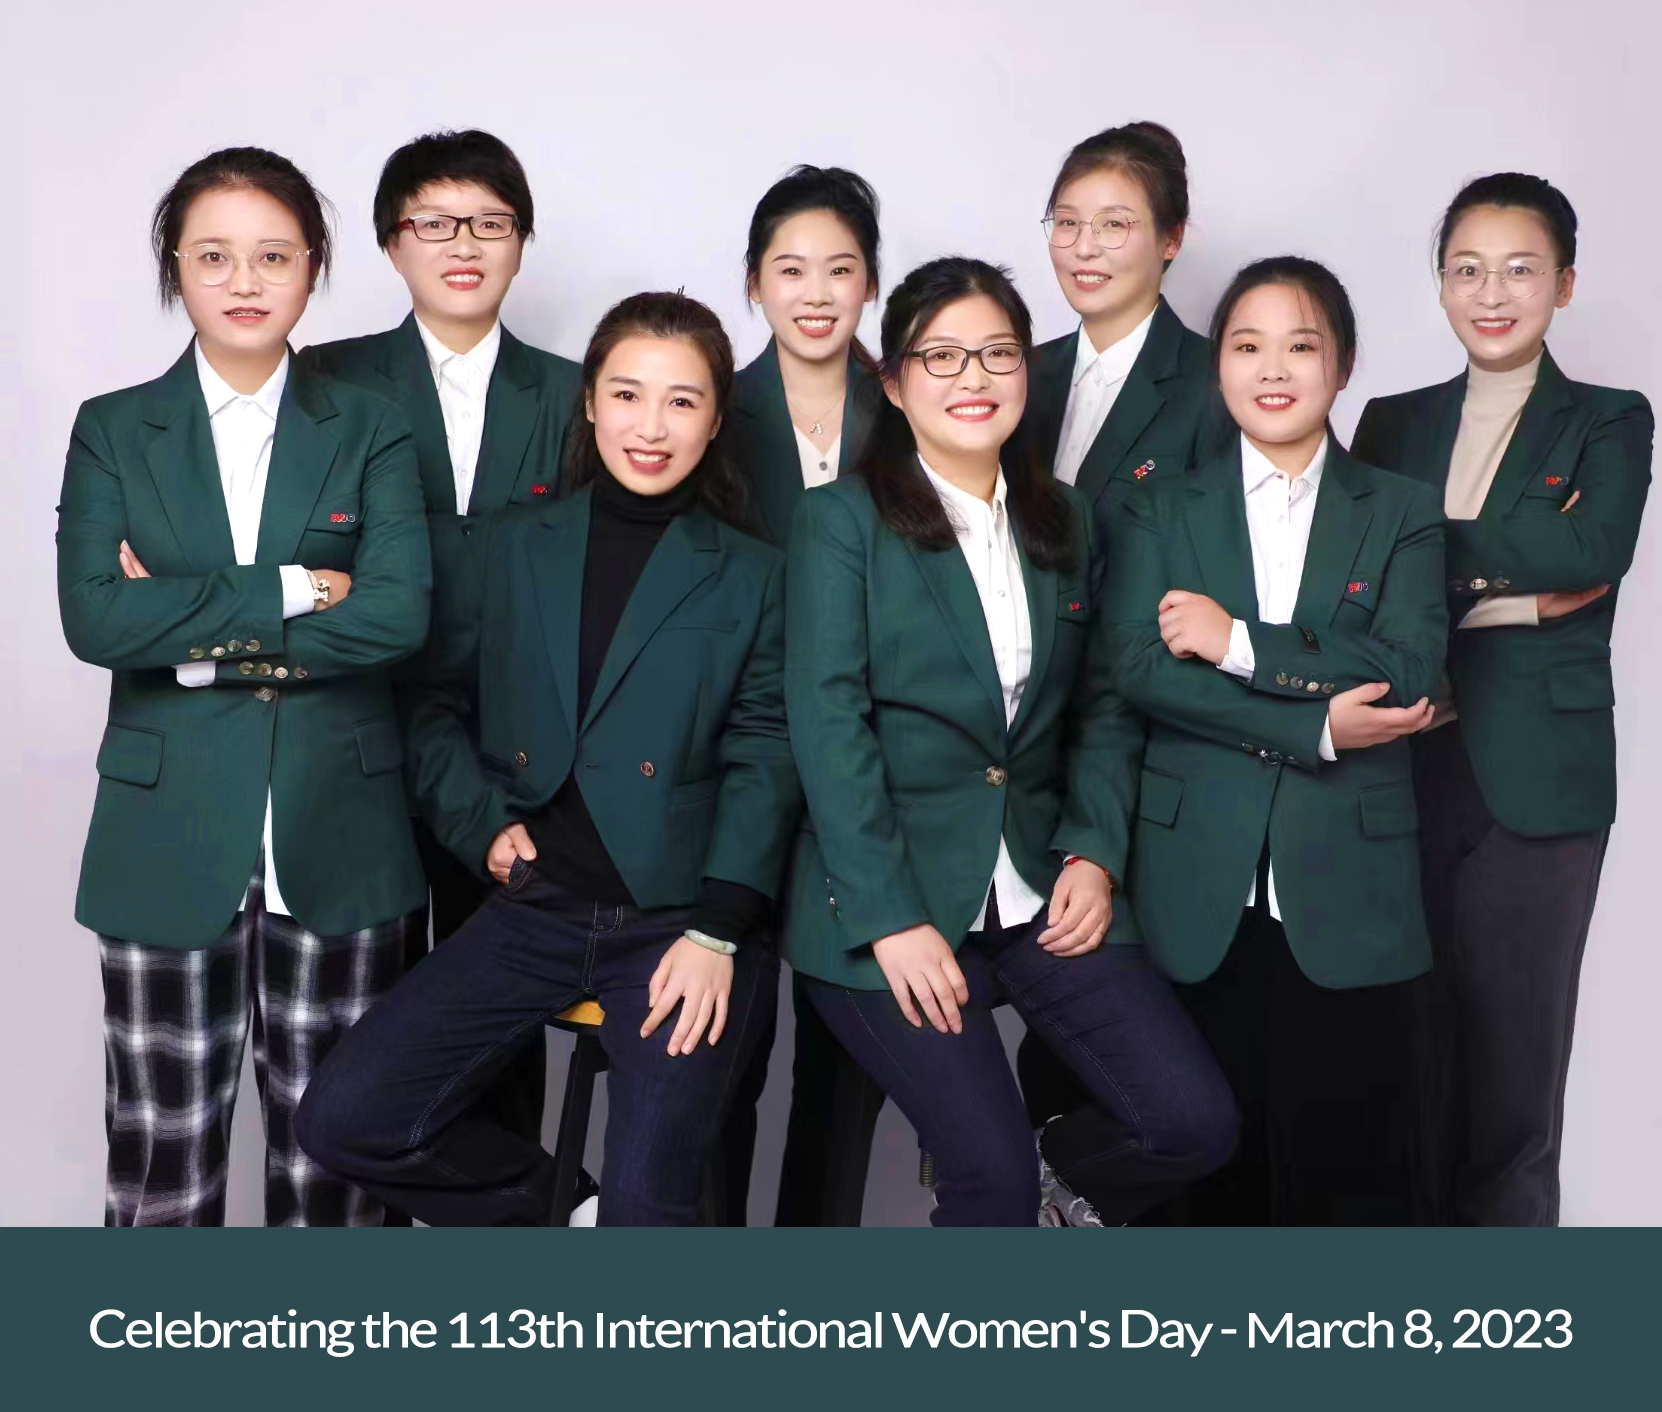 Celebrating the 113th International Women's Day - March 8, 2023